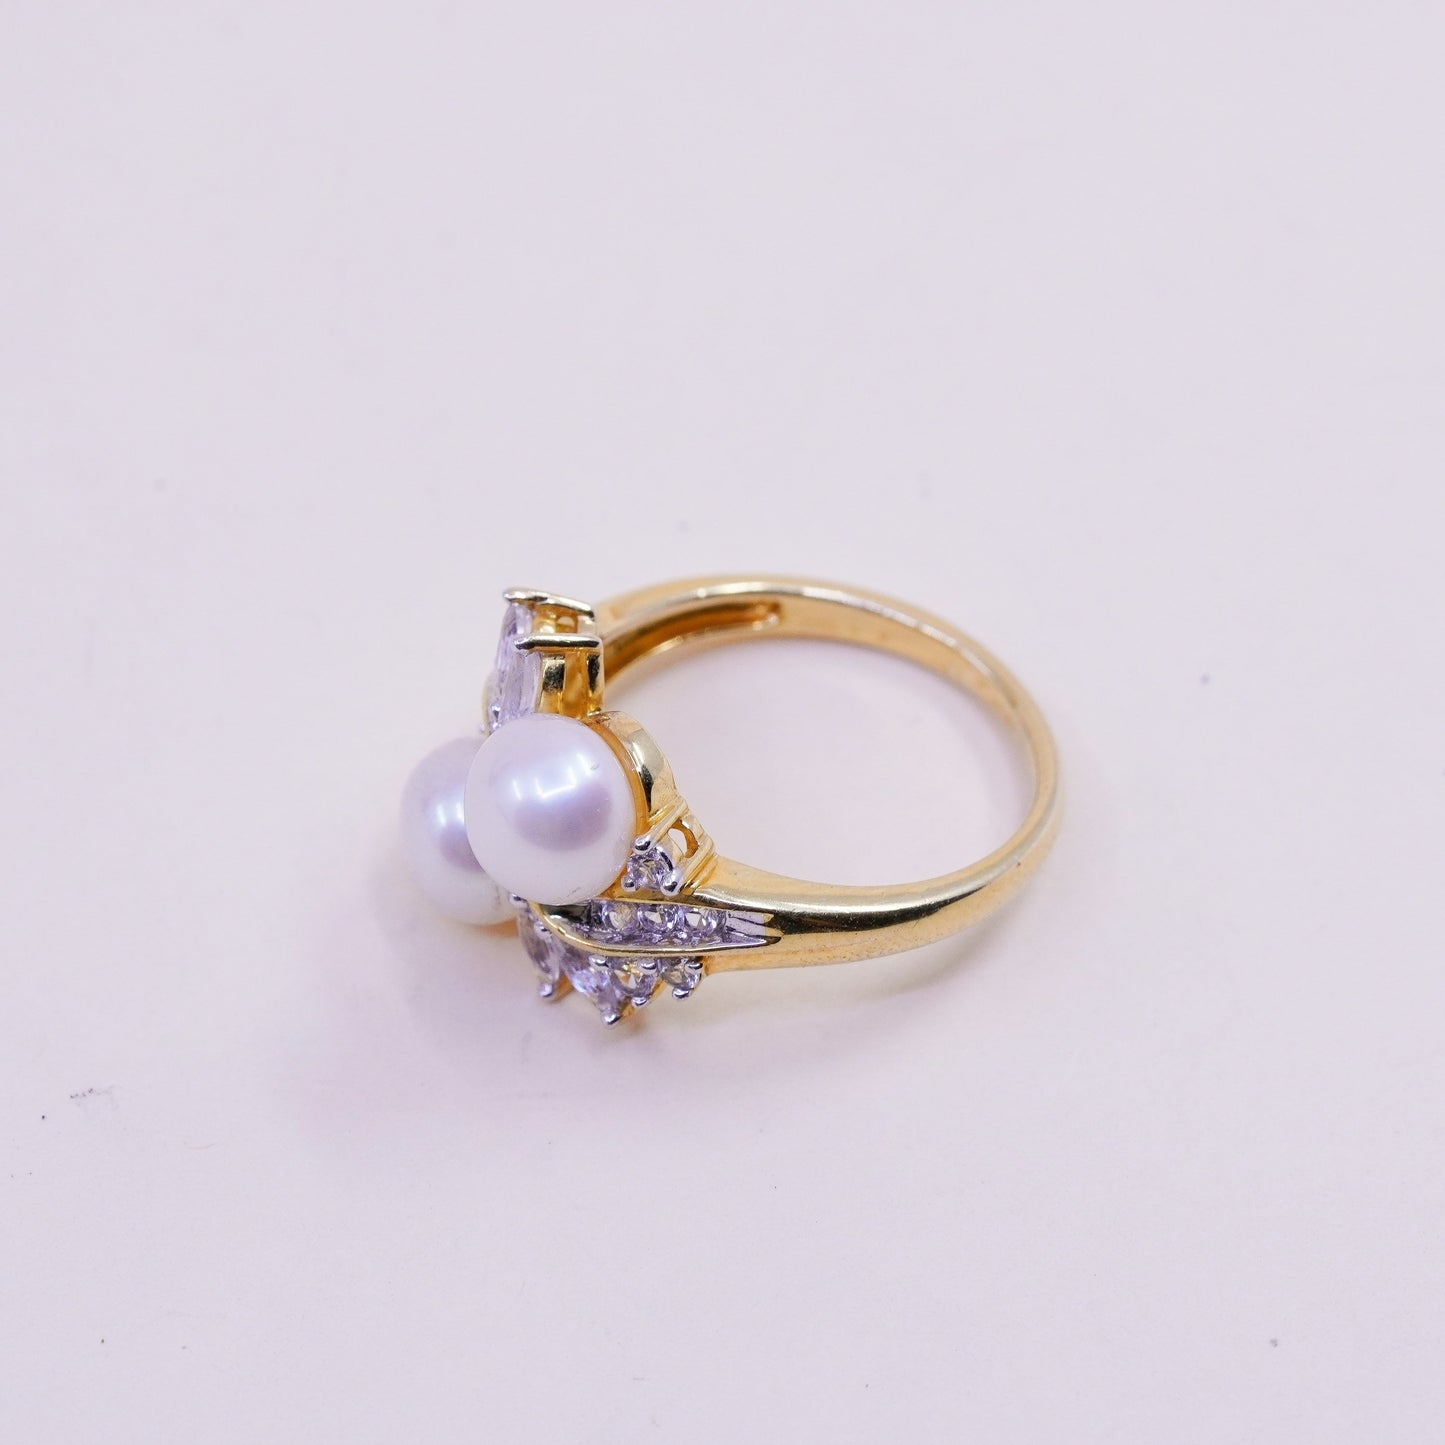 Size 7, vermeil gold filled sterling 925 silver engagement ring with pearl cz